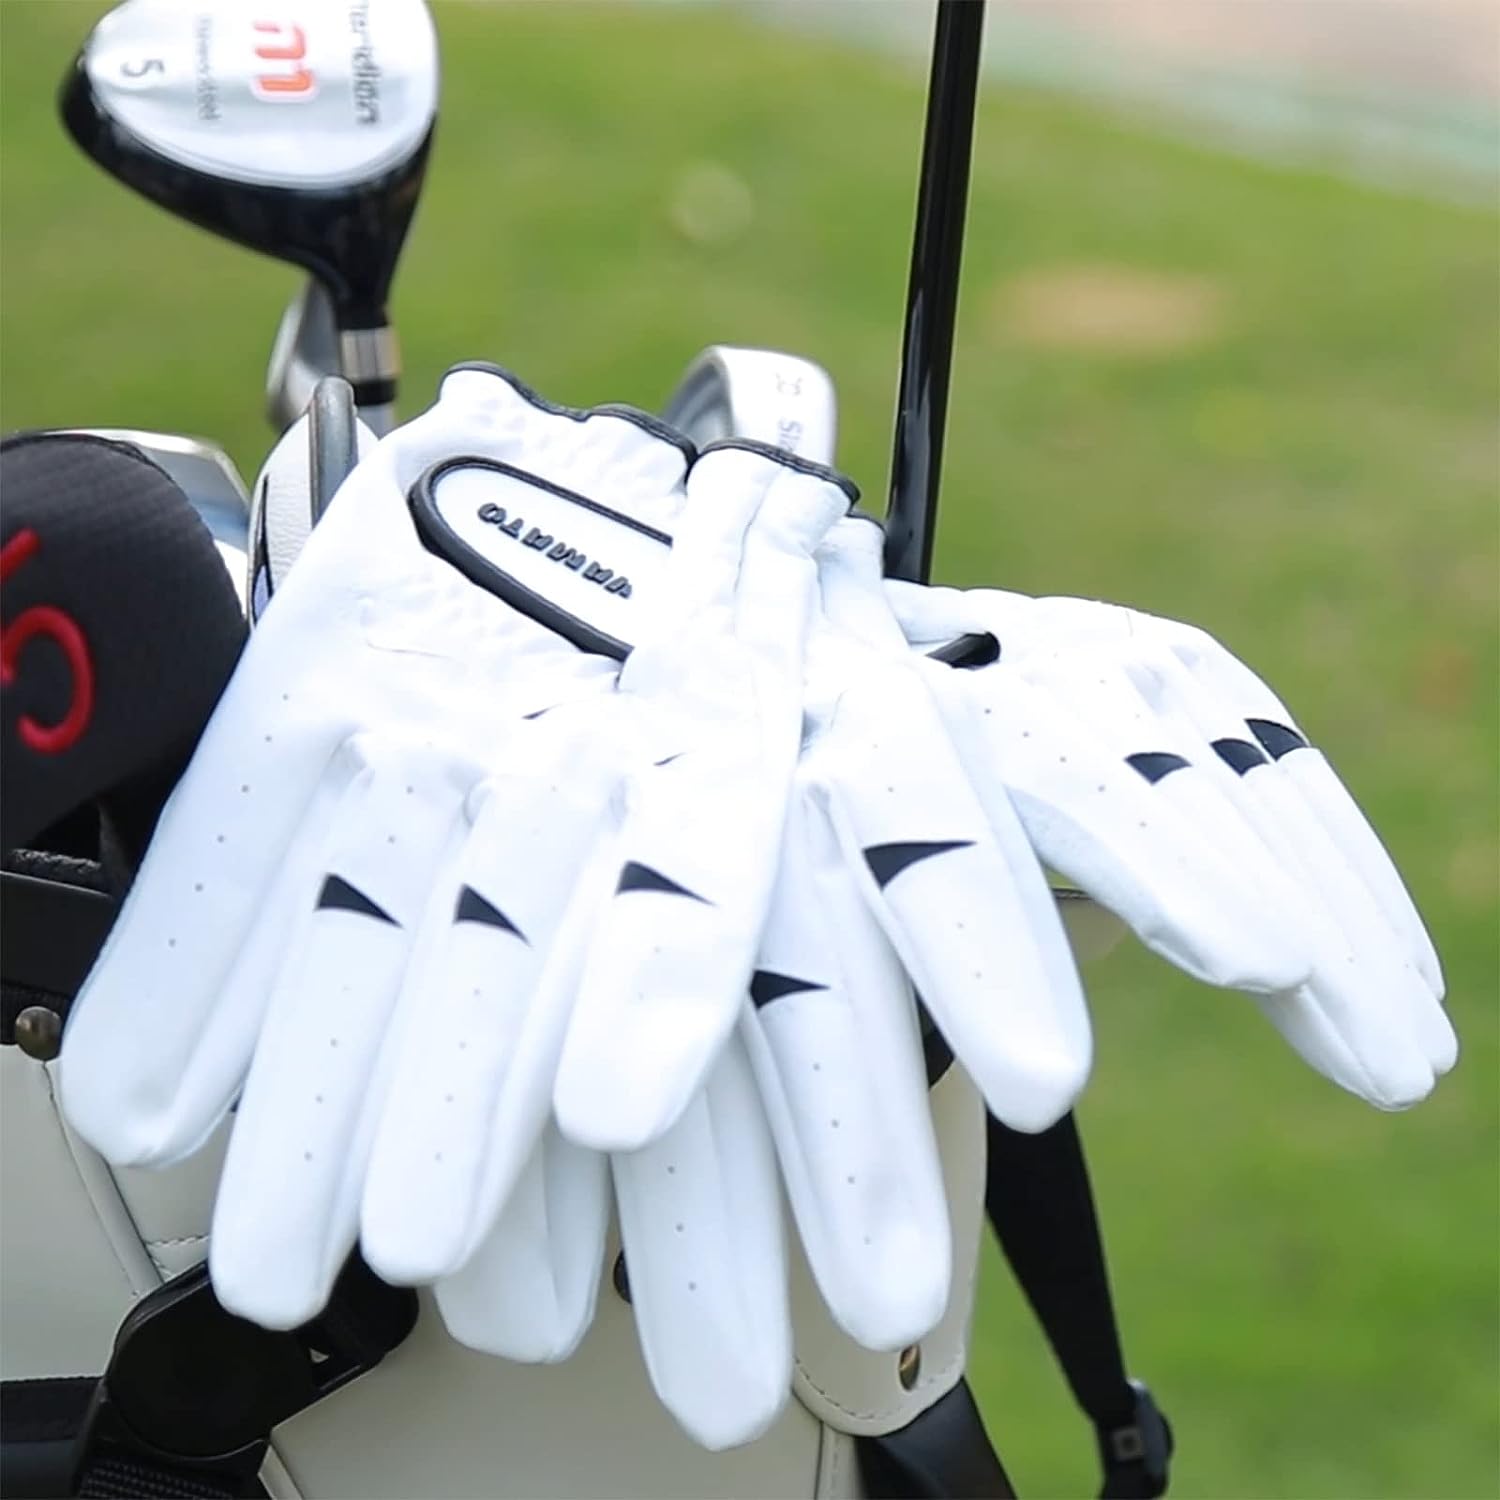 Yamato Golf Gloves Review